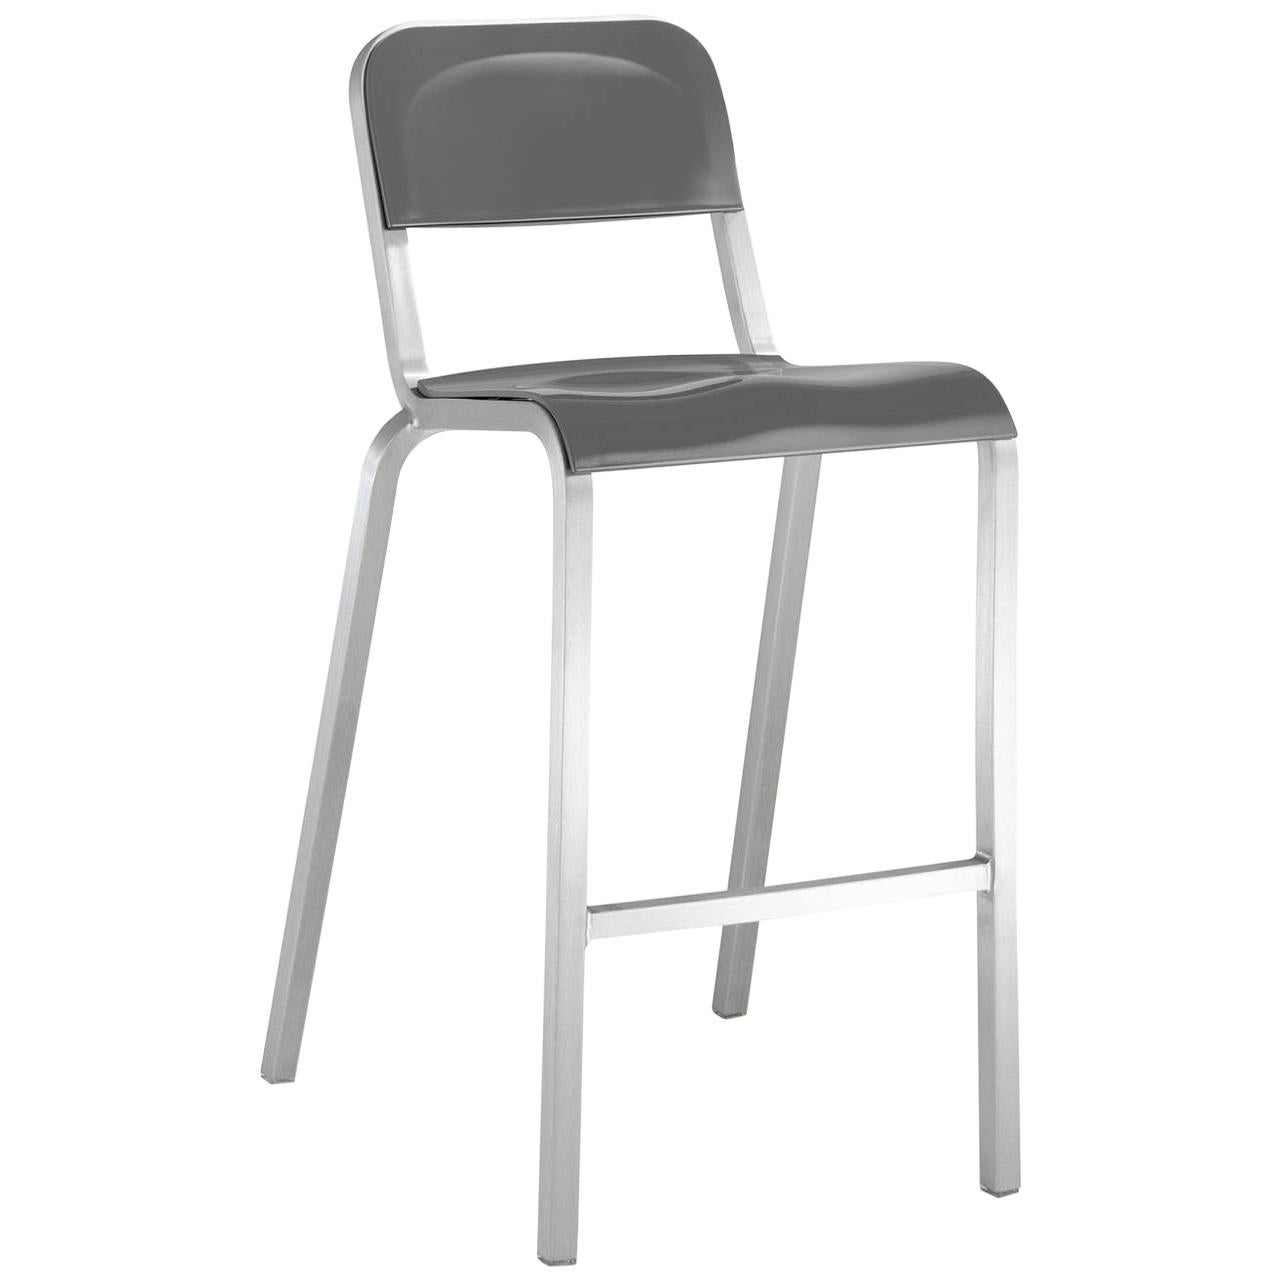 Emeco 1951 Barstool in Brushed Aluminum and Gray by Adrian Van Hooydonk For Sale